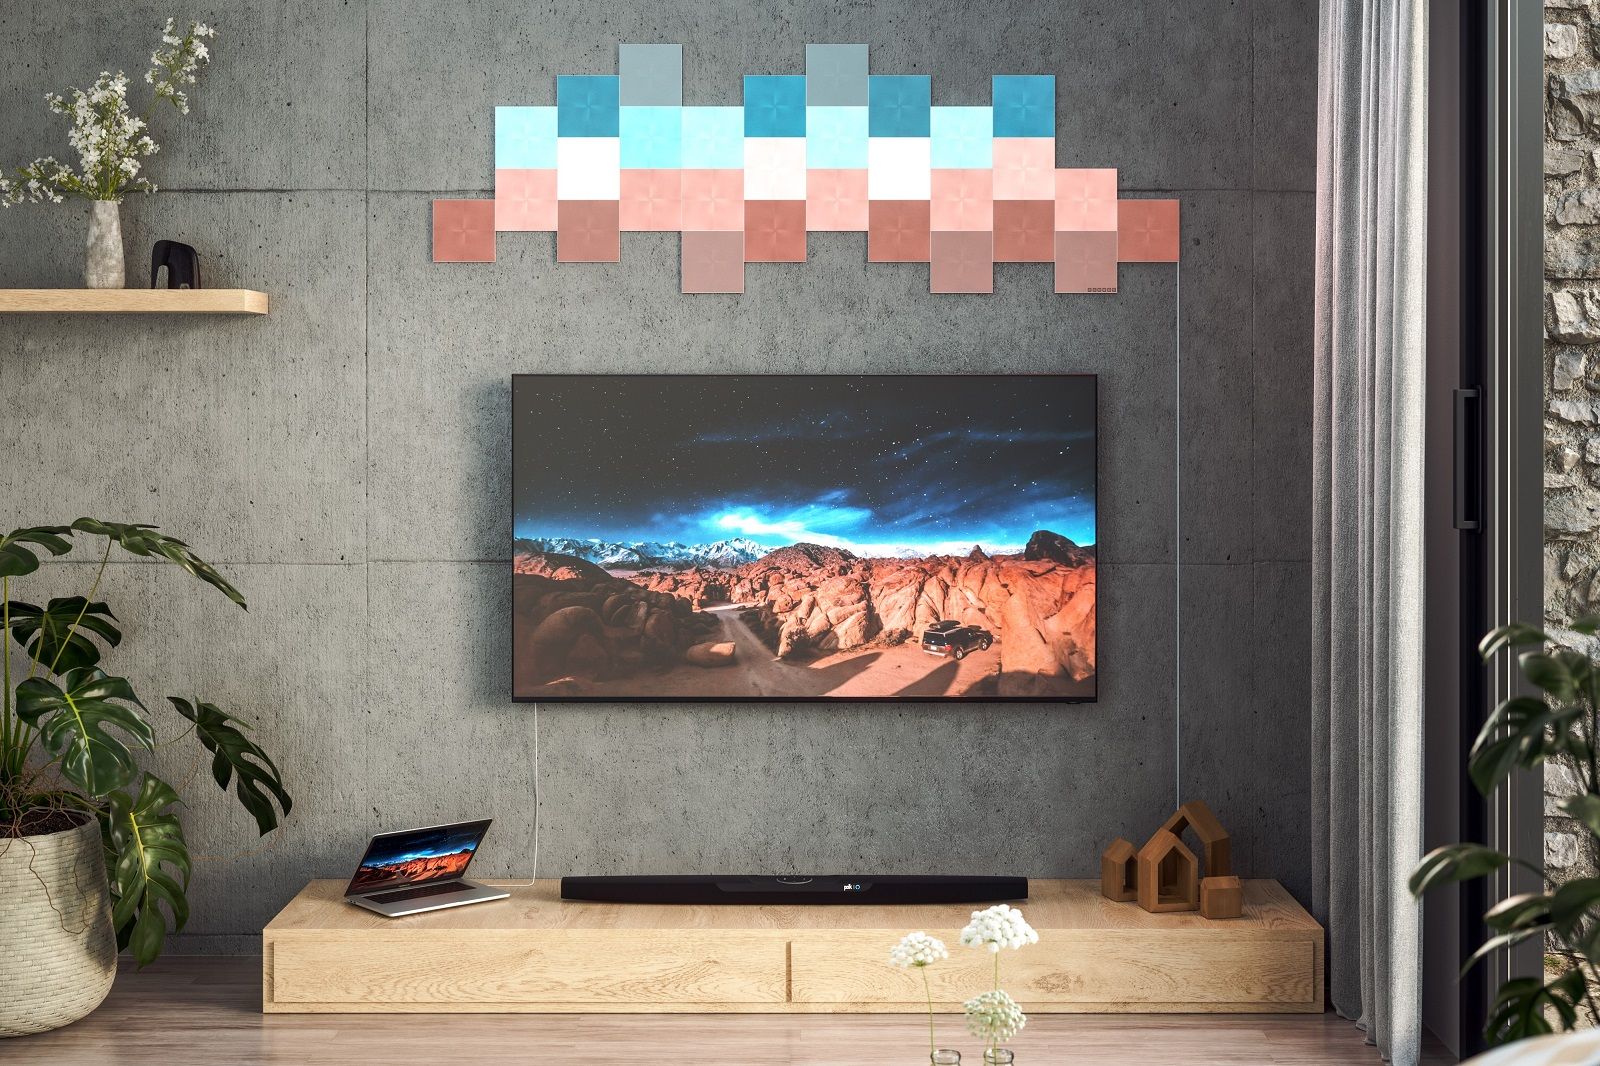 Nanoleaf unveils screen mirroring to sync light panels with your games and movies image 1